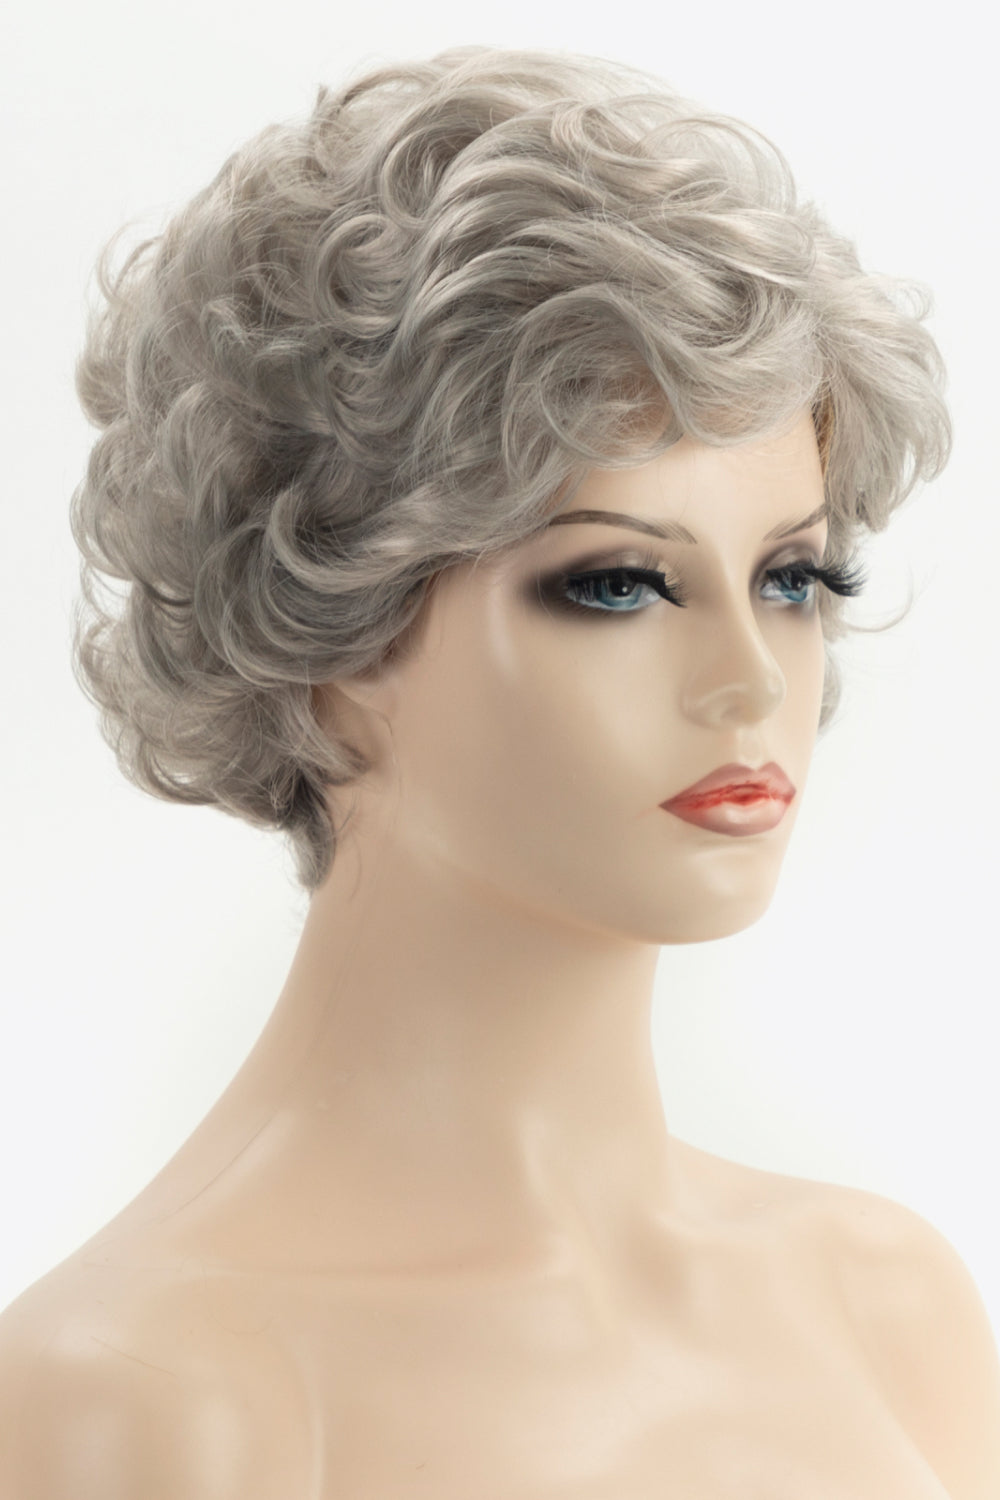 Synthetic Curly Short Wigs 4''